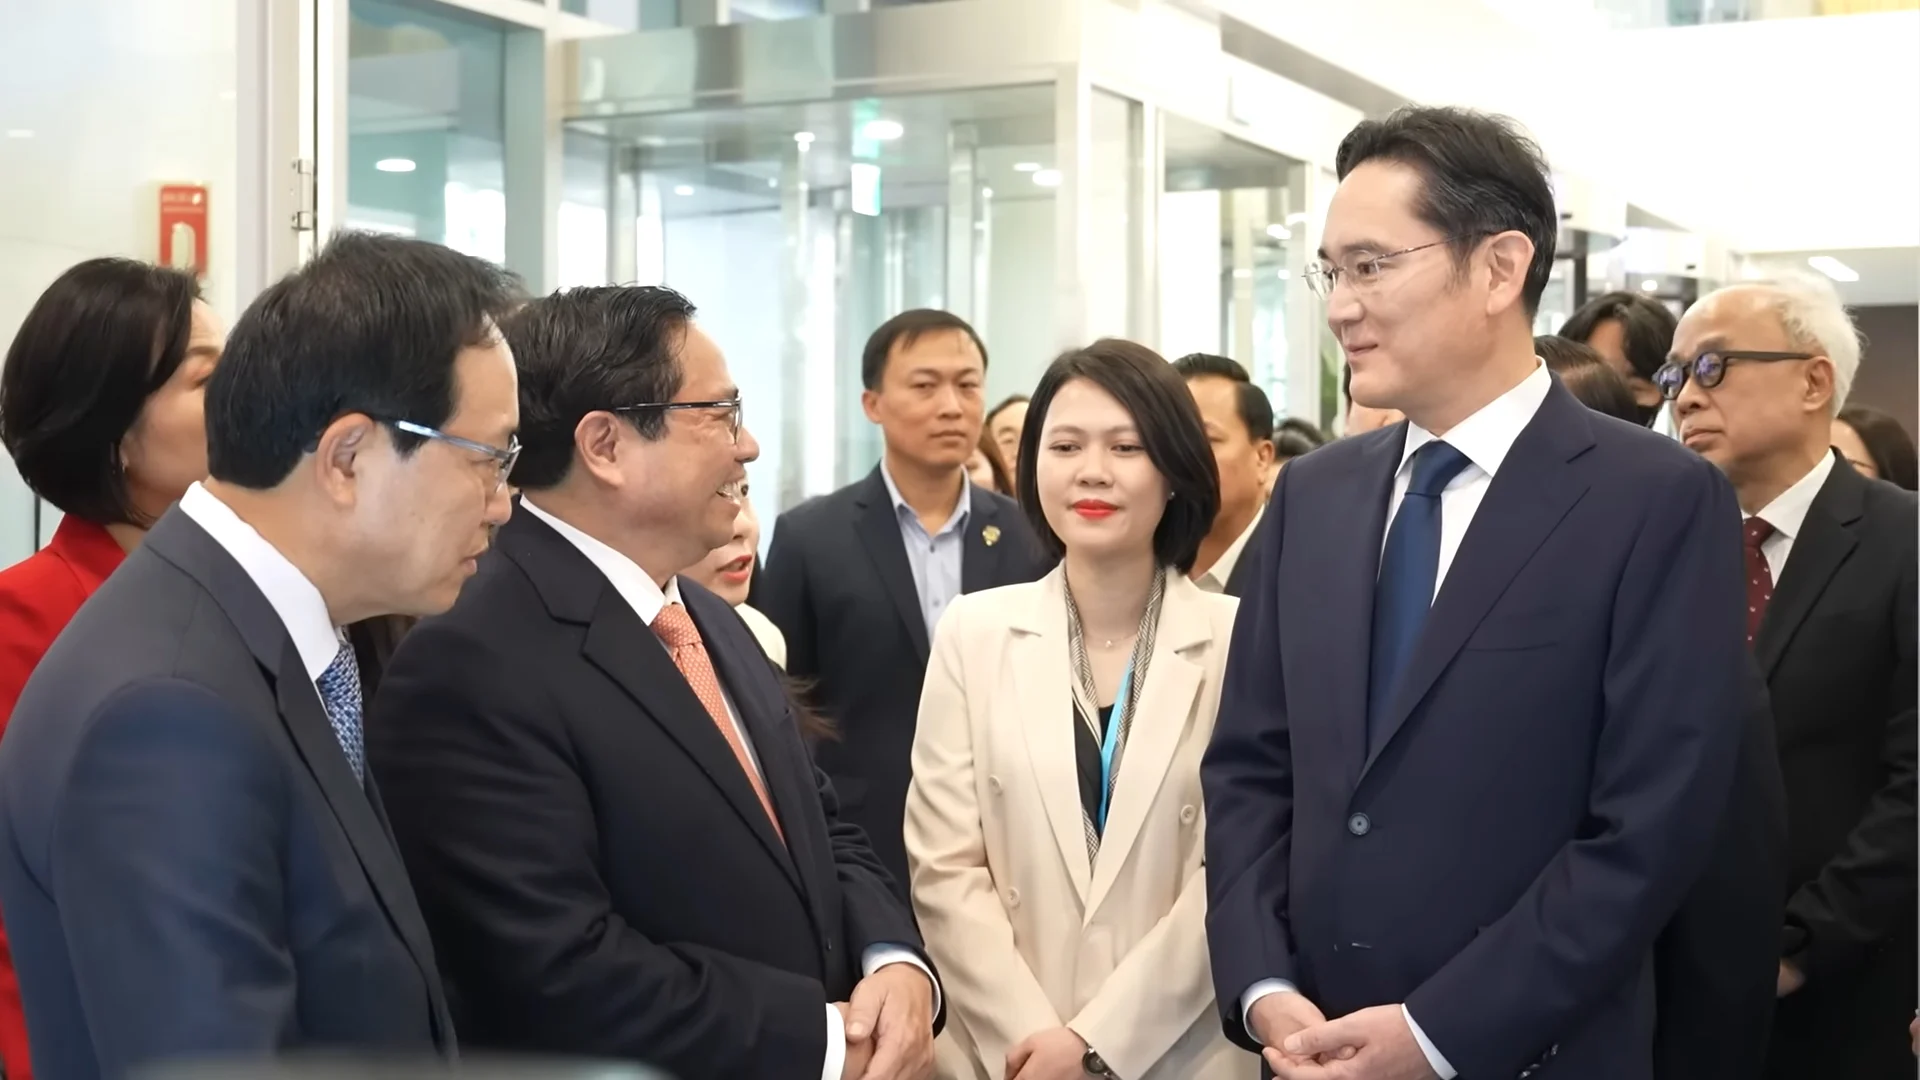 Samsung CEO J.Y. Lee supports South Korean athletes at the Paris Olympics